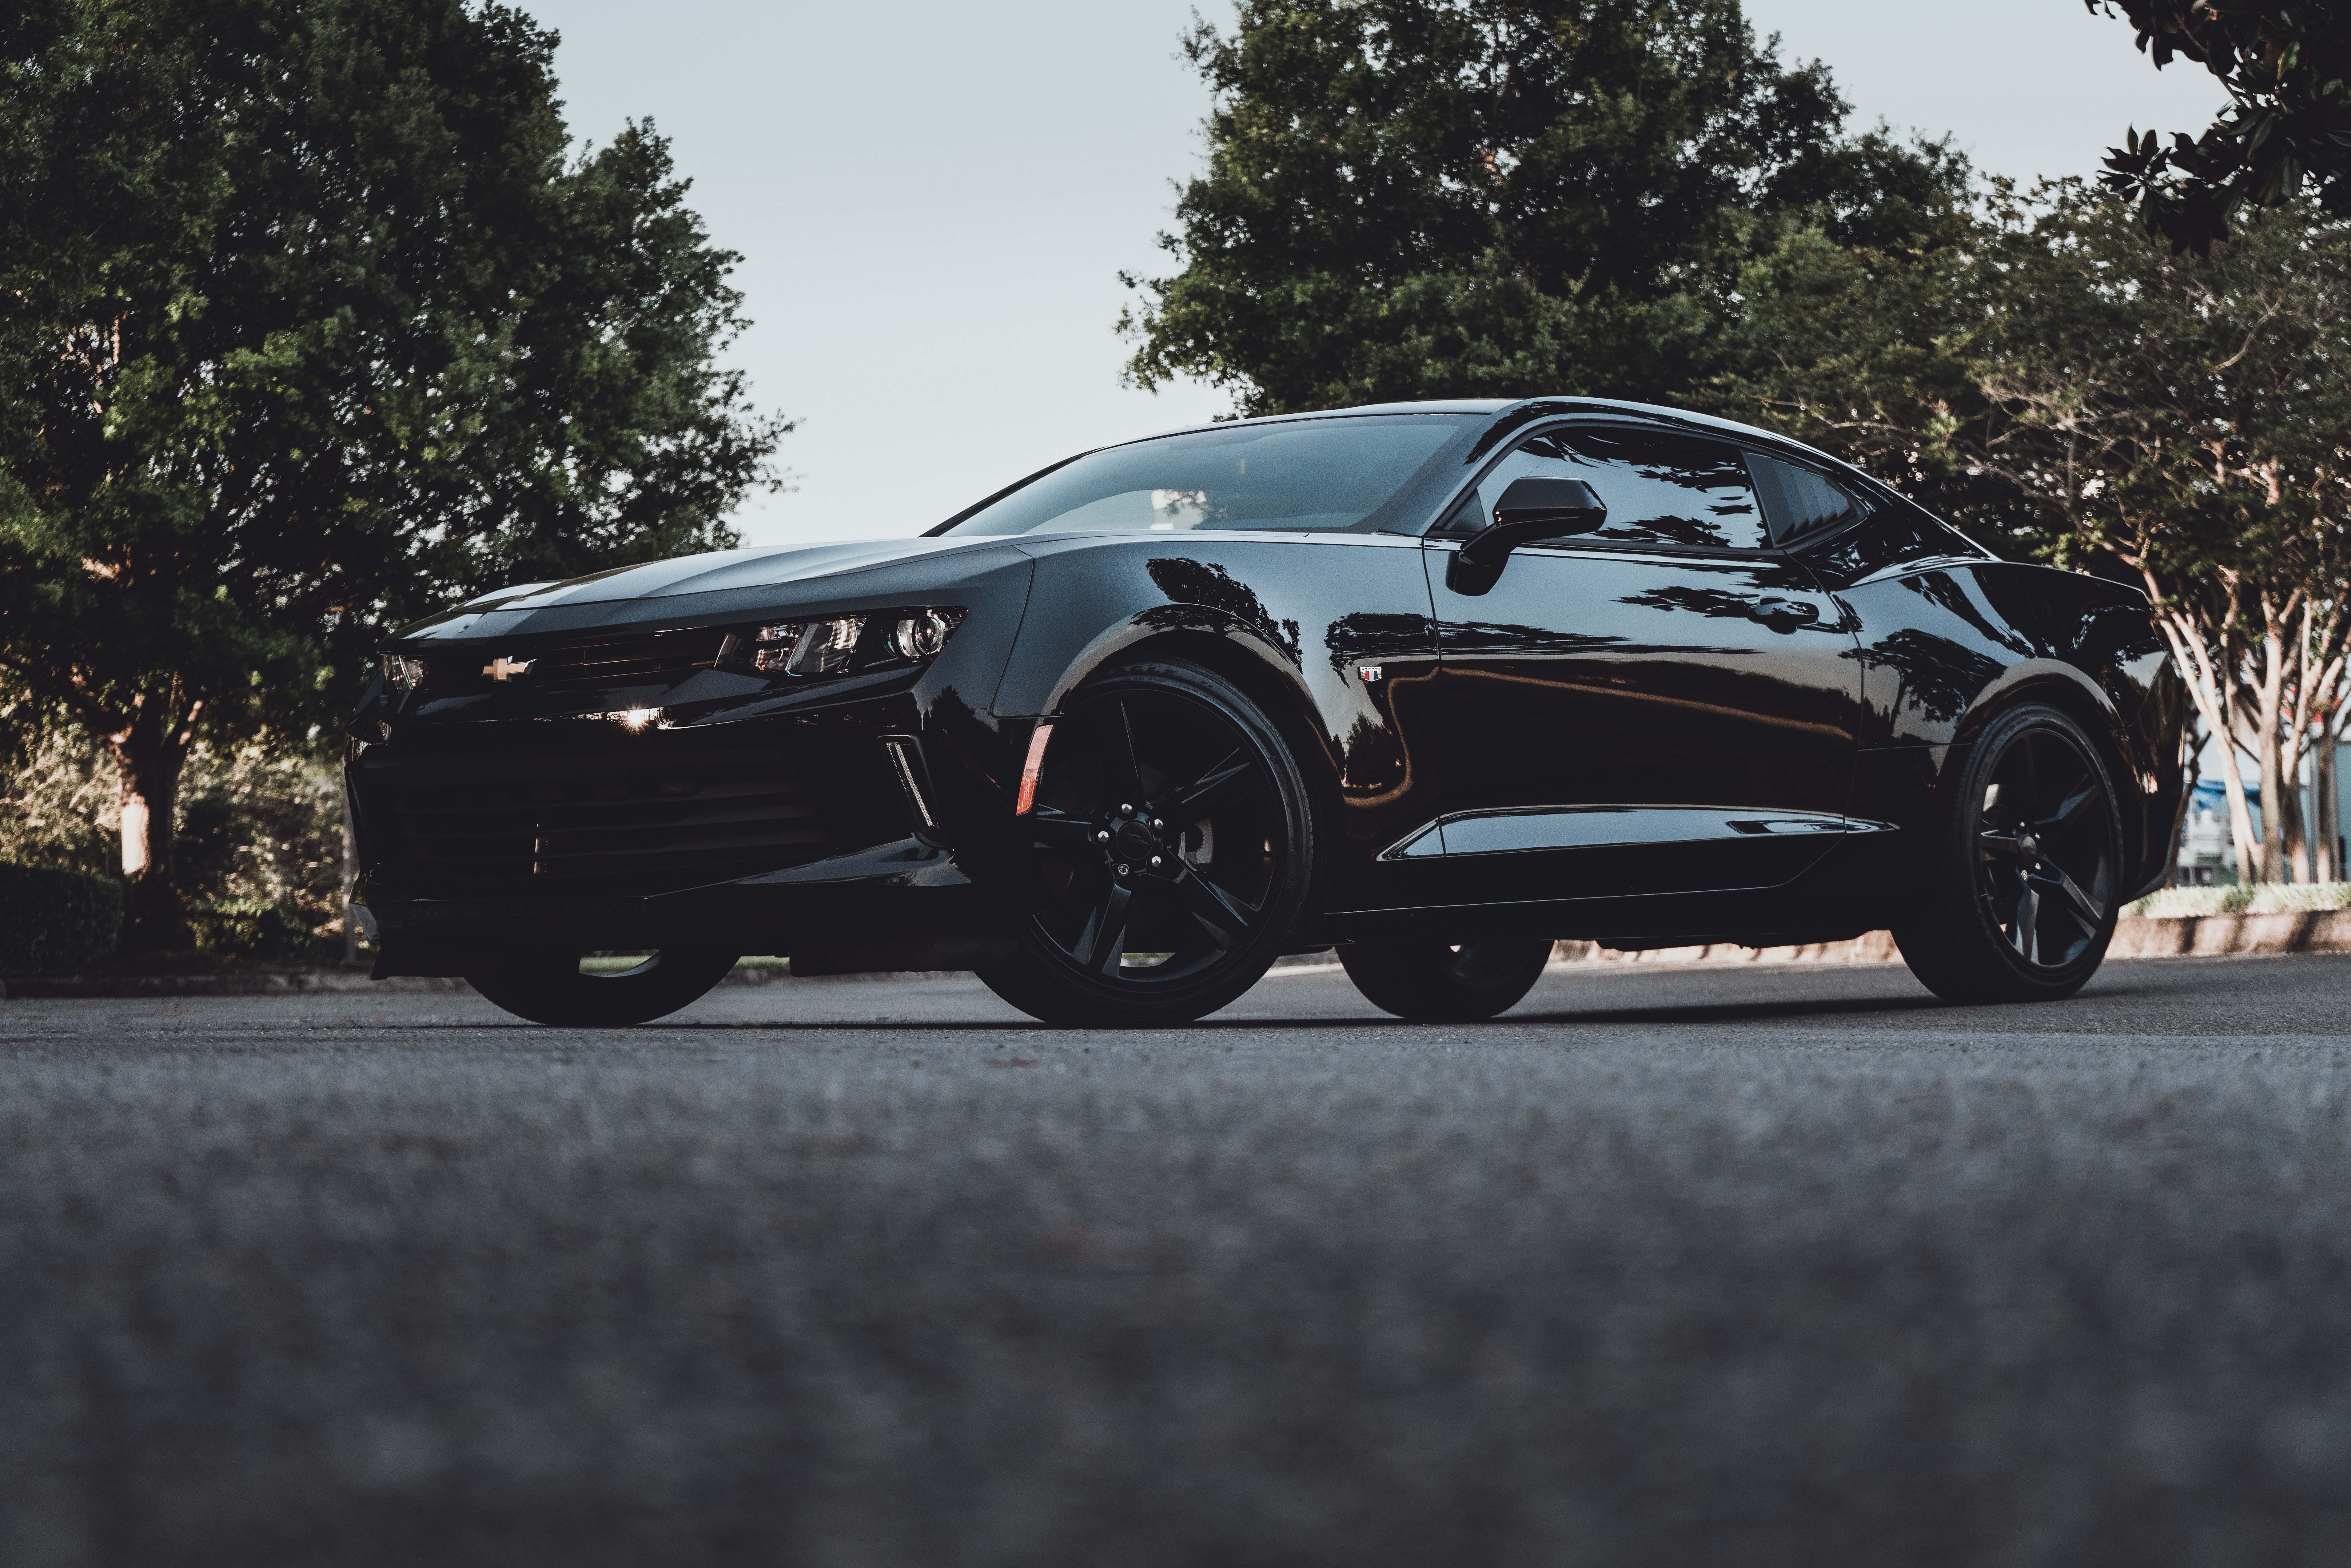 The next morning, an expensive black car pulled outside Maria's house. | Source: Unsplash